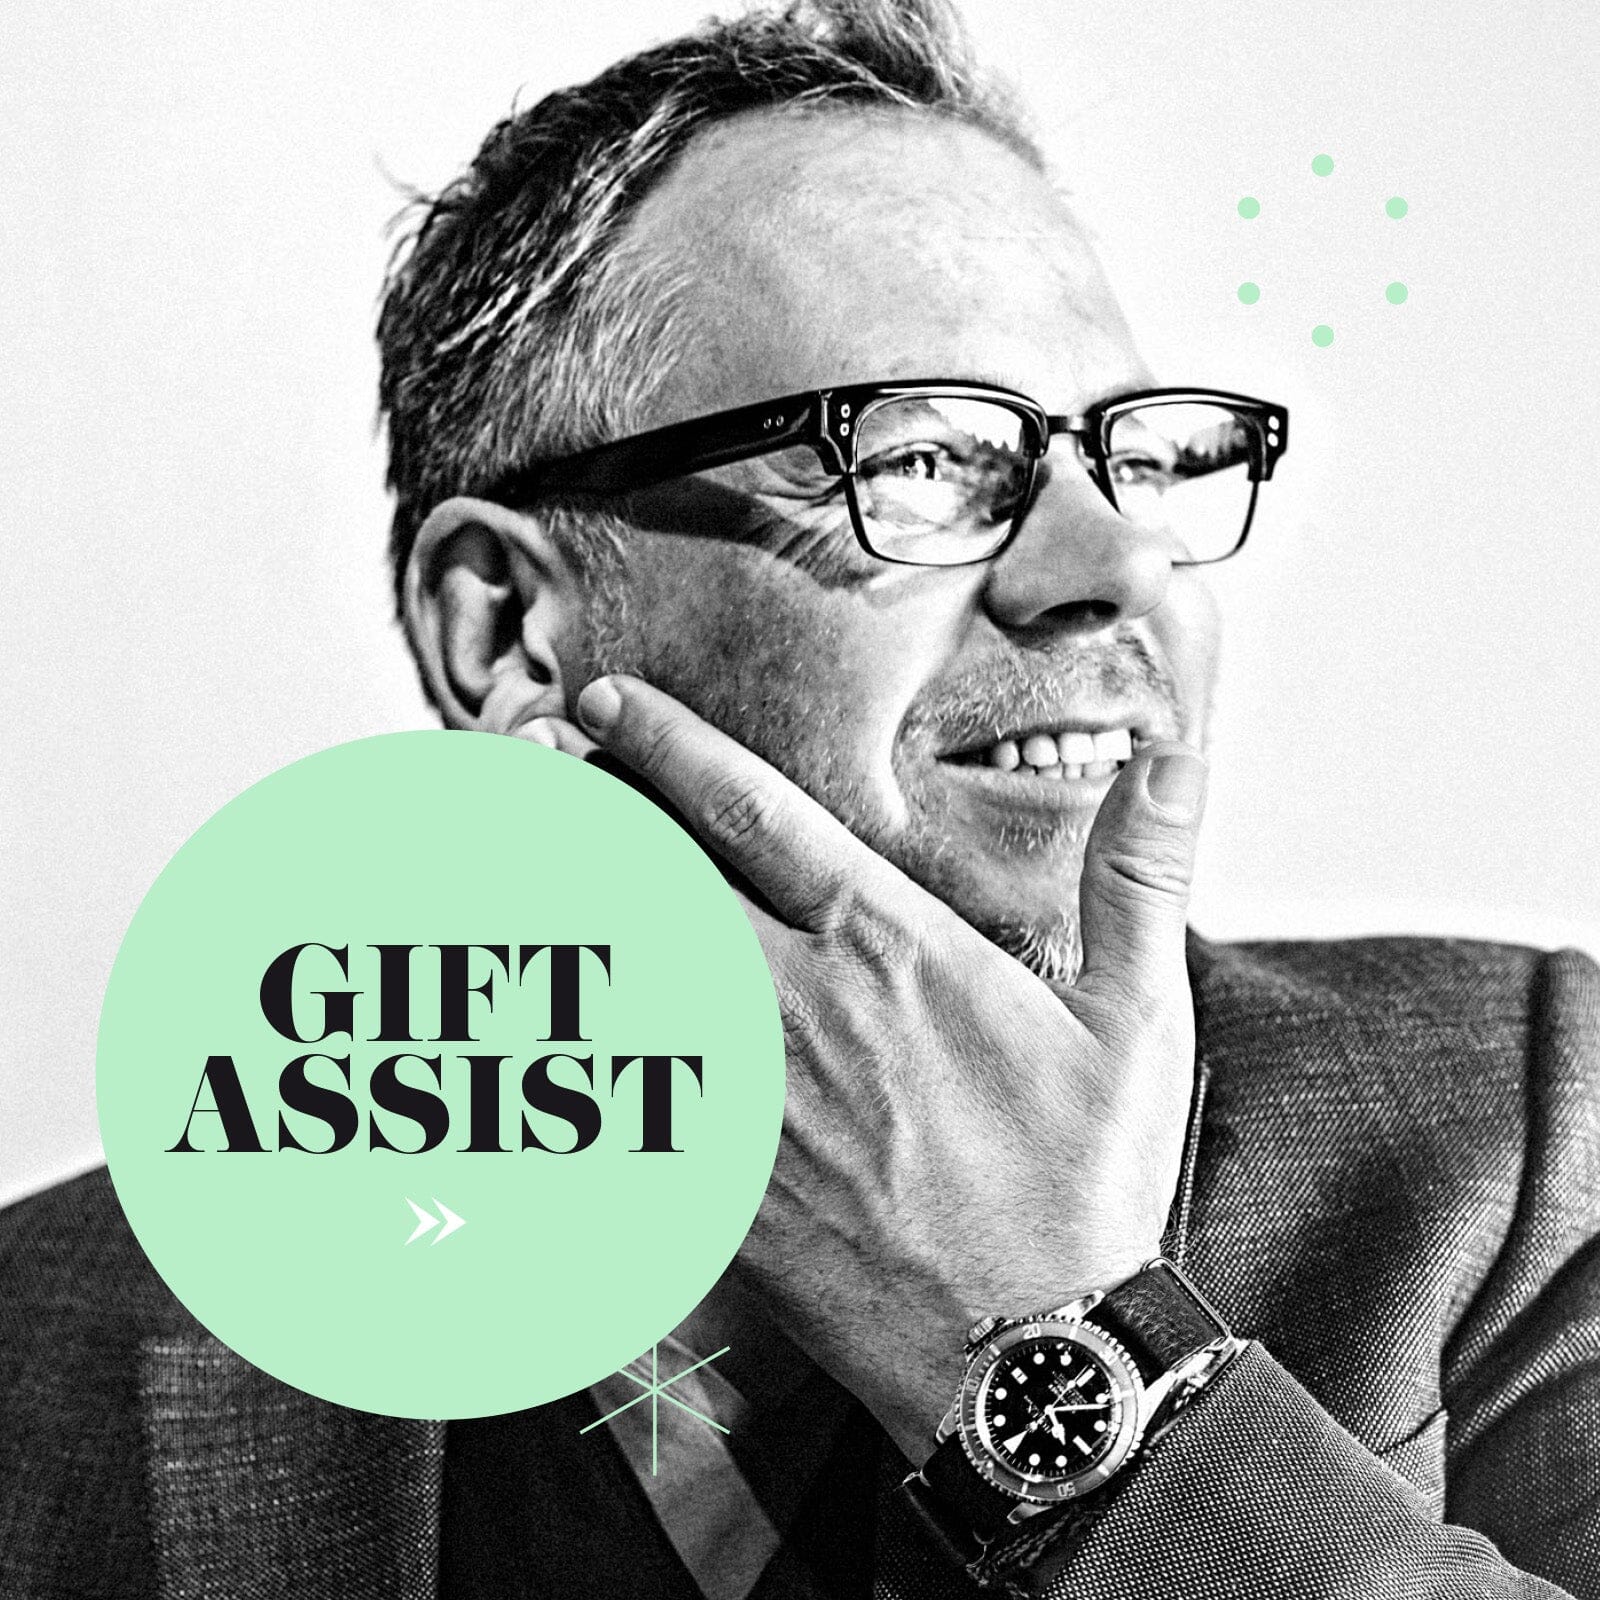 GIFT ASSIST: OUR SERVICE FOR YOUR PERSONAL SHOPPING